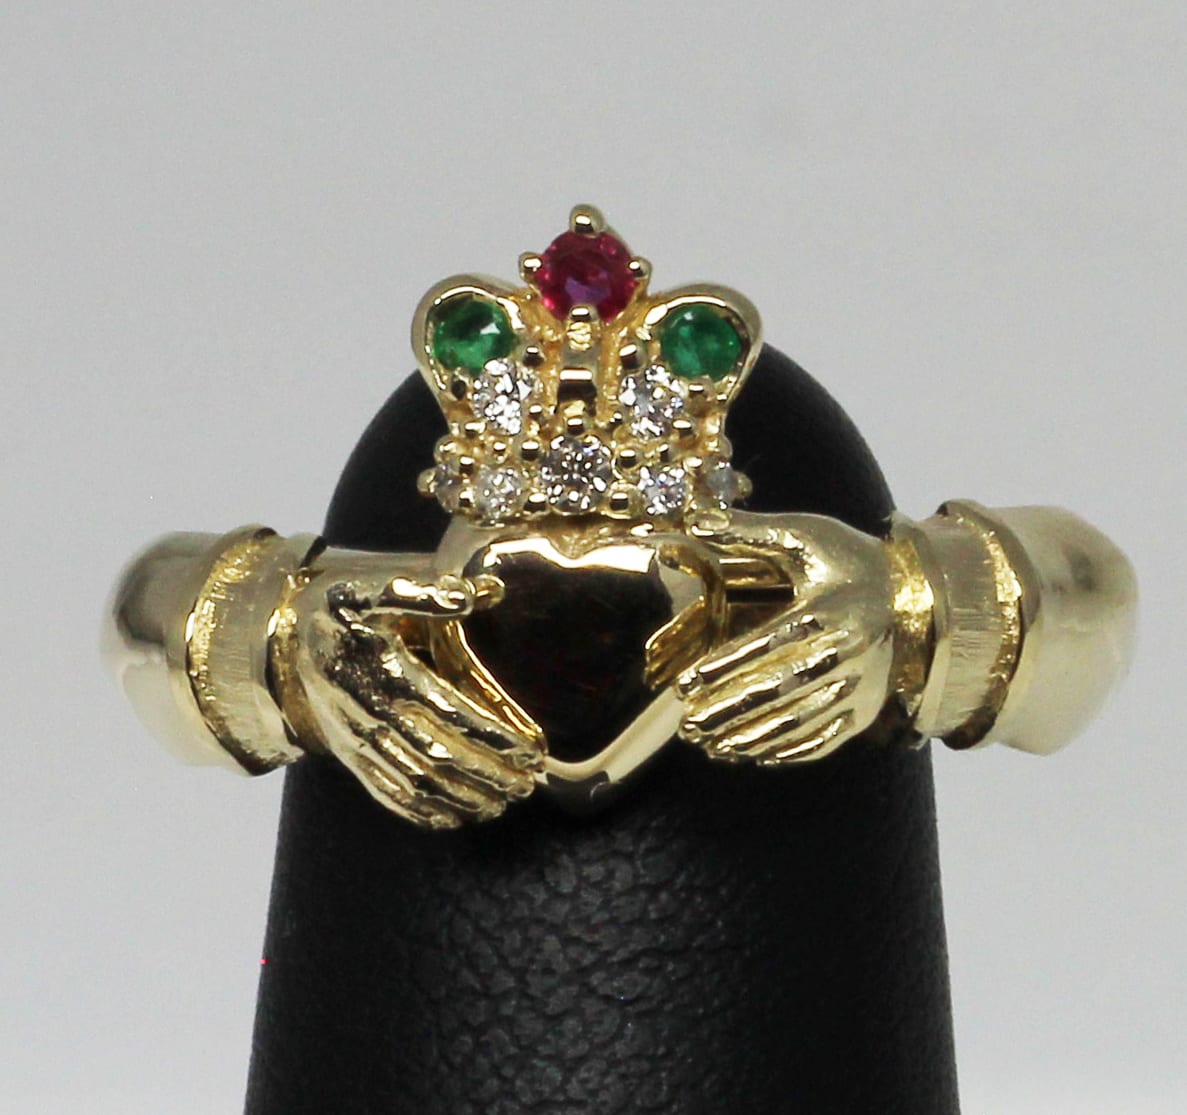 Complete Guide To Claddagh Rings FAQs Fallers Irish Jewelry, 56% OFF